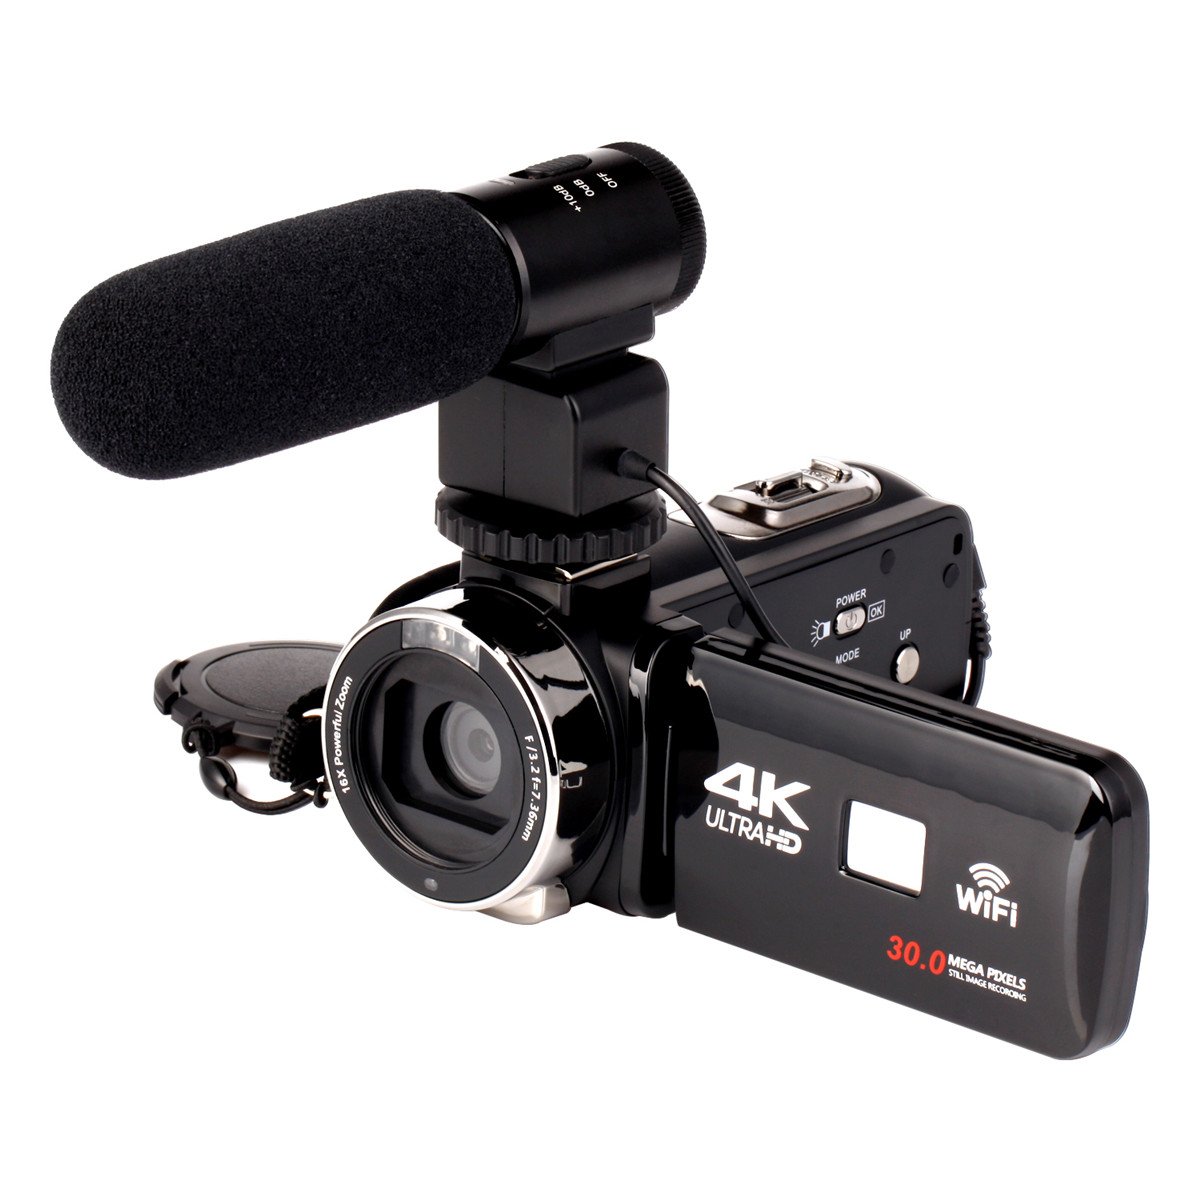 4K WiFi Ultra HD 1080P 16X ZOOM Digital Video Camera DV Camcorder with Lens and Microphone 2